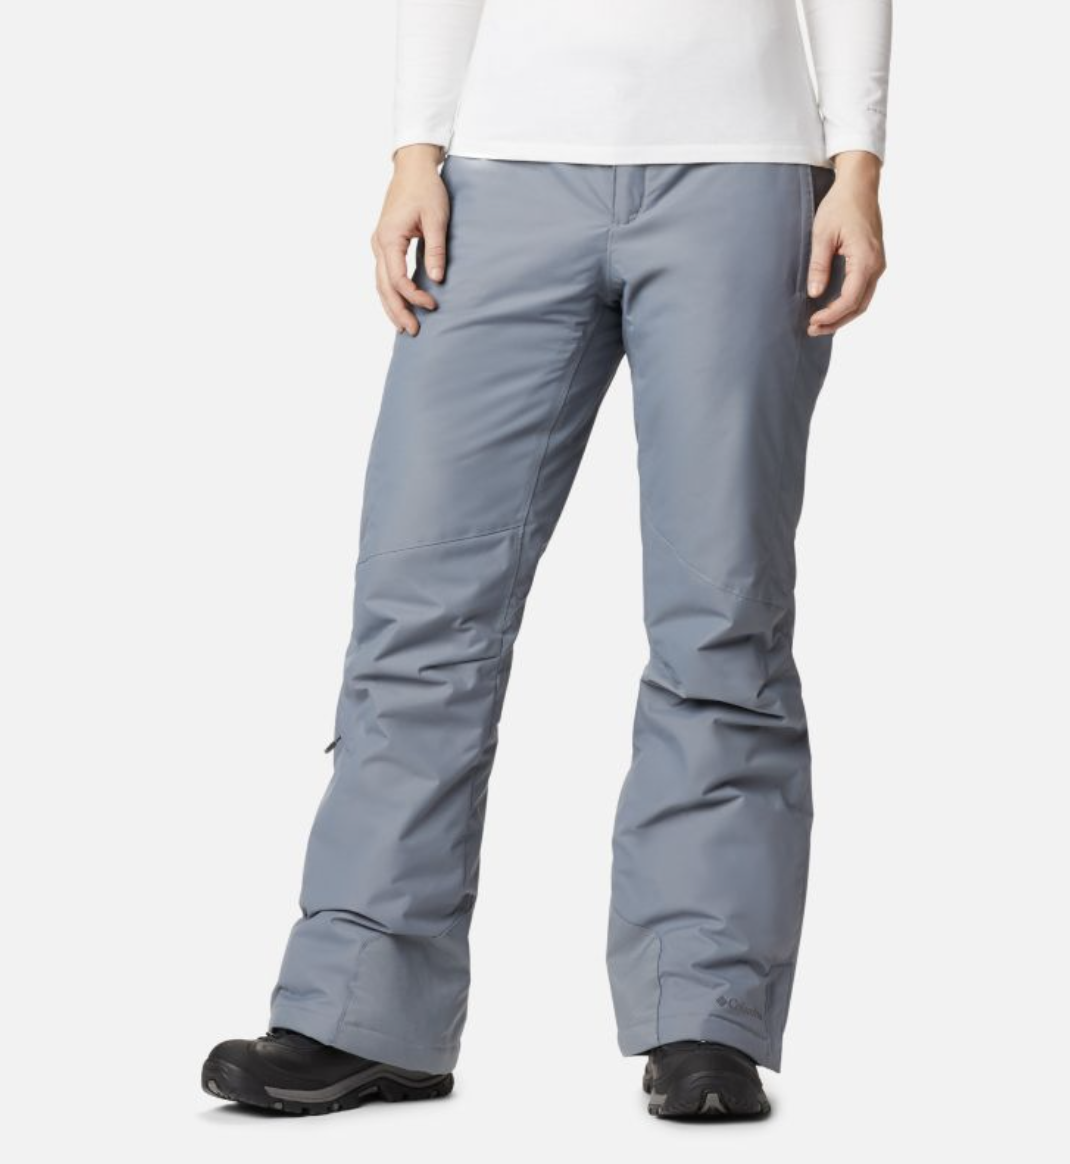 gray winter pants for women to wear in the snow